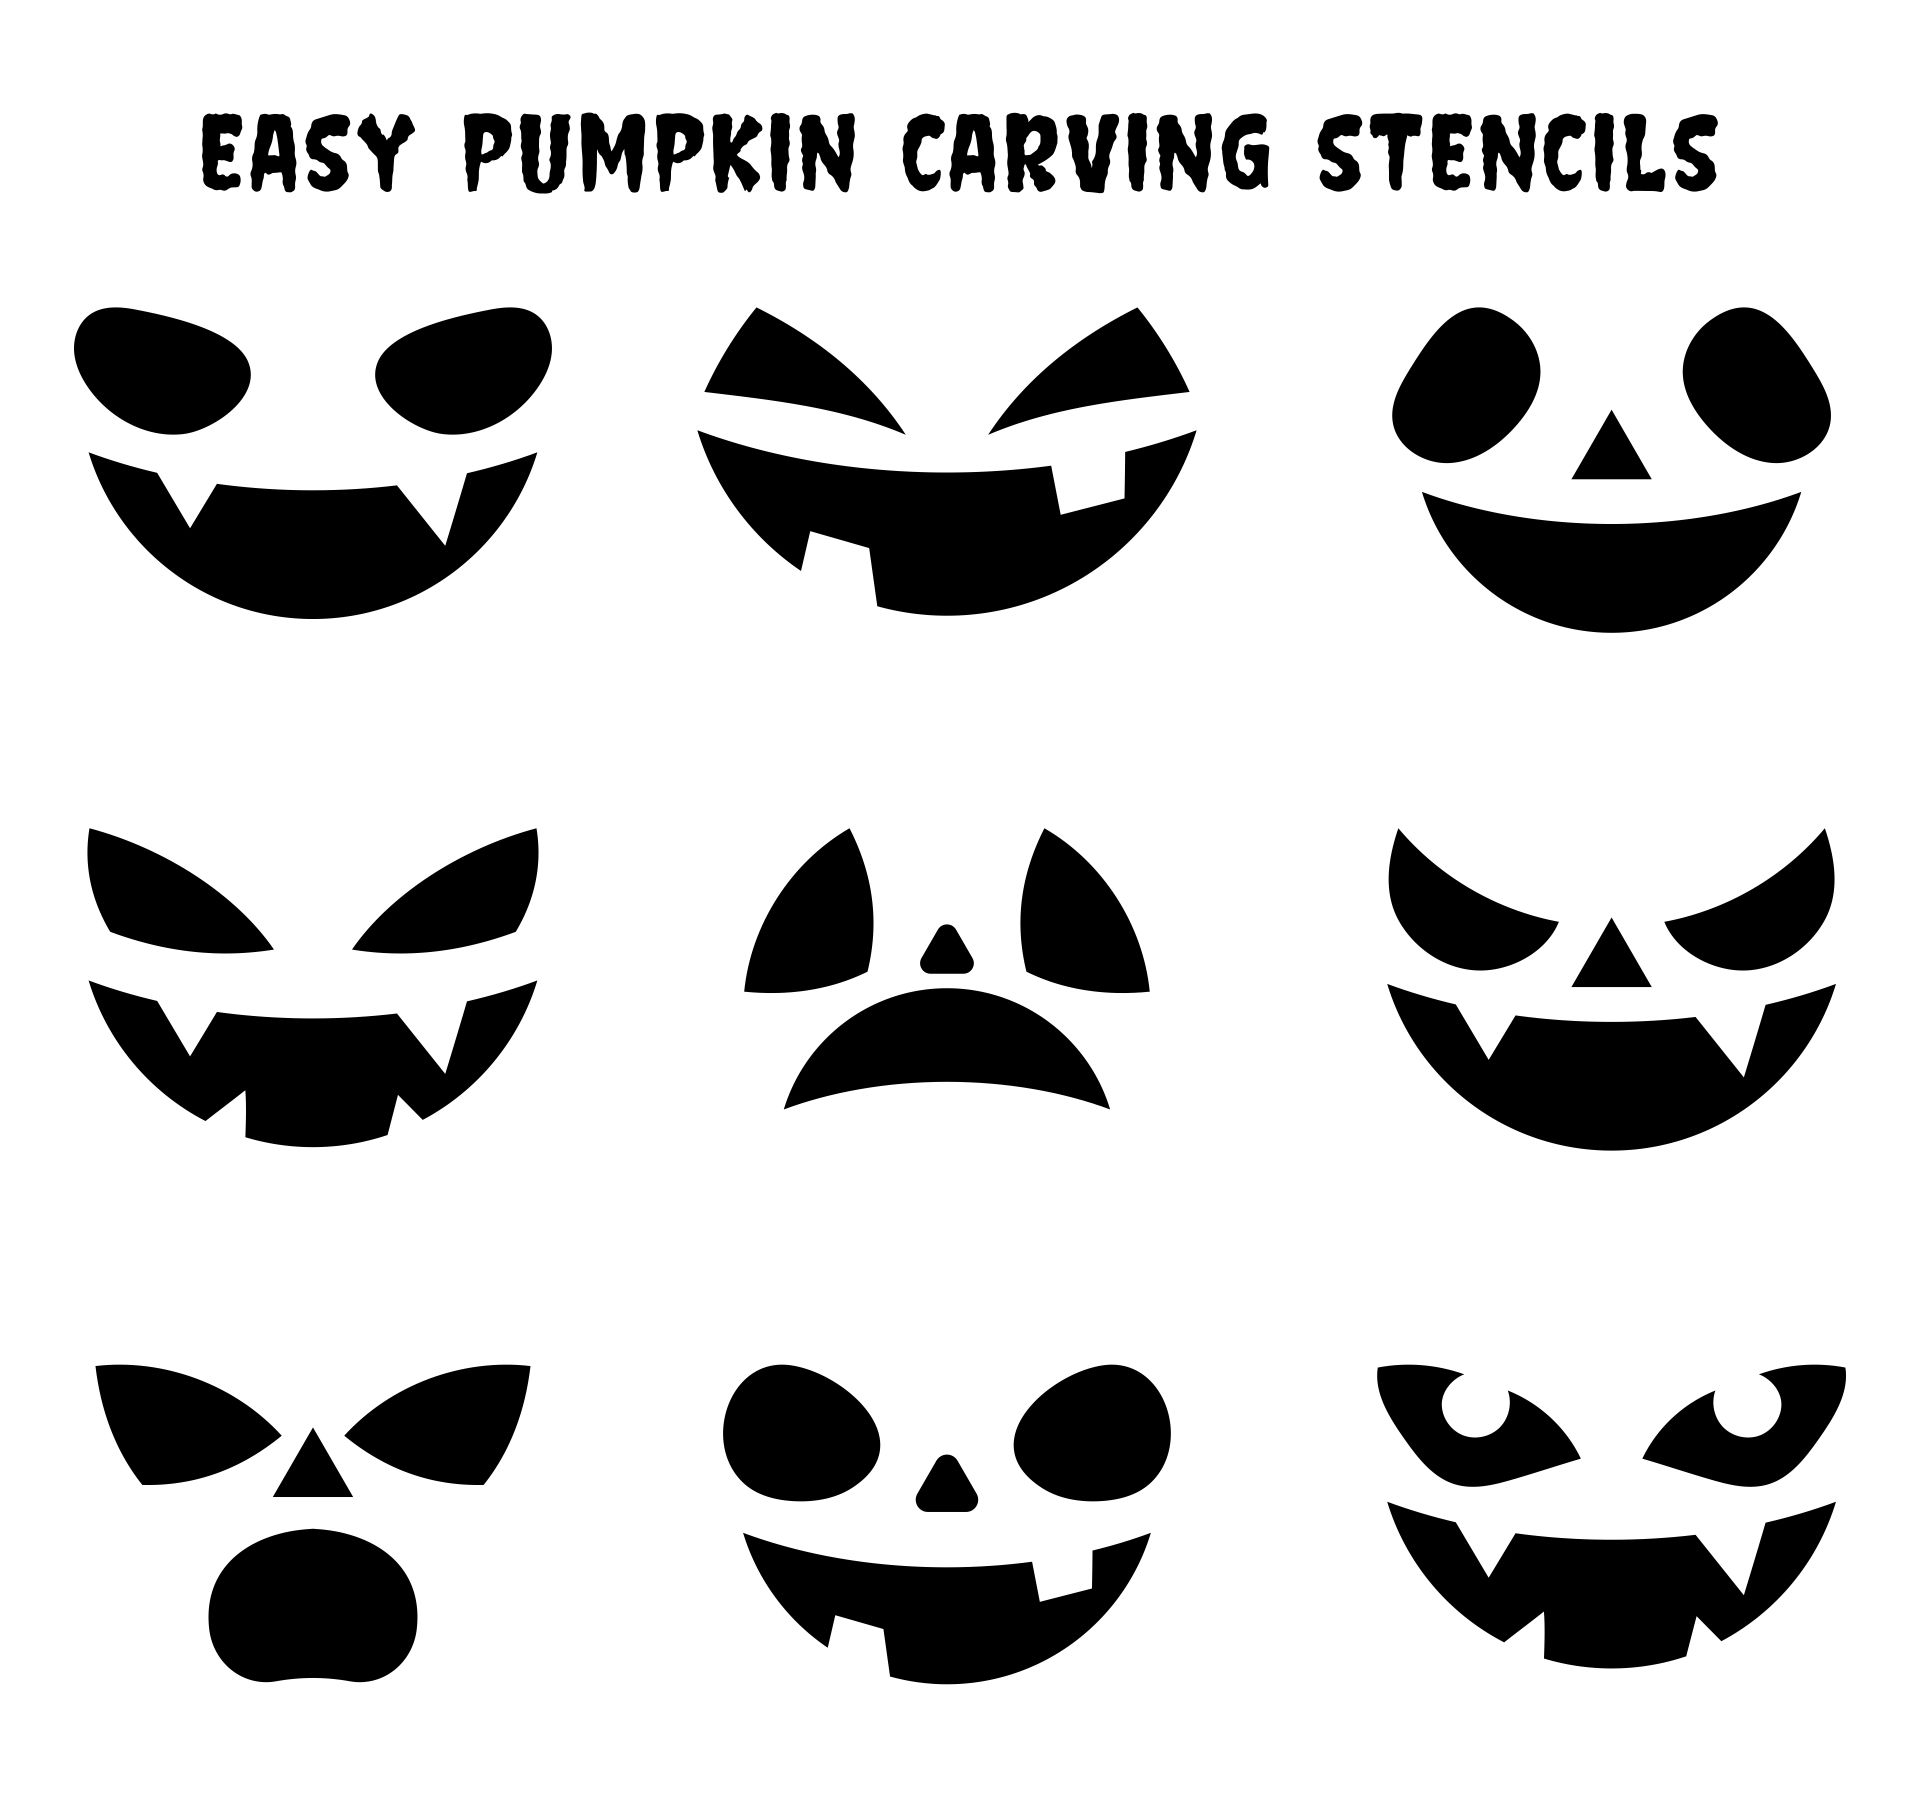 6-best-images-of-easy-pumpkin-carving-patterns-free-printable-easy